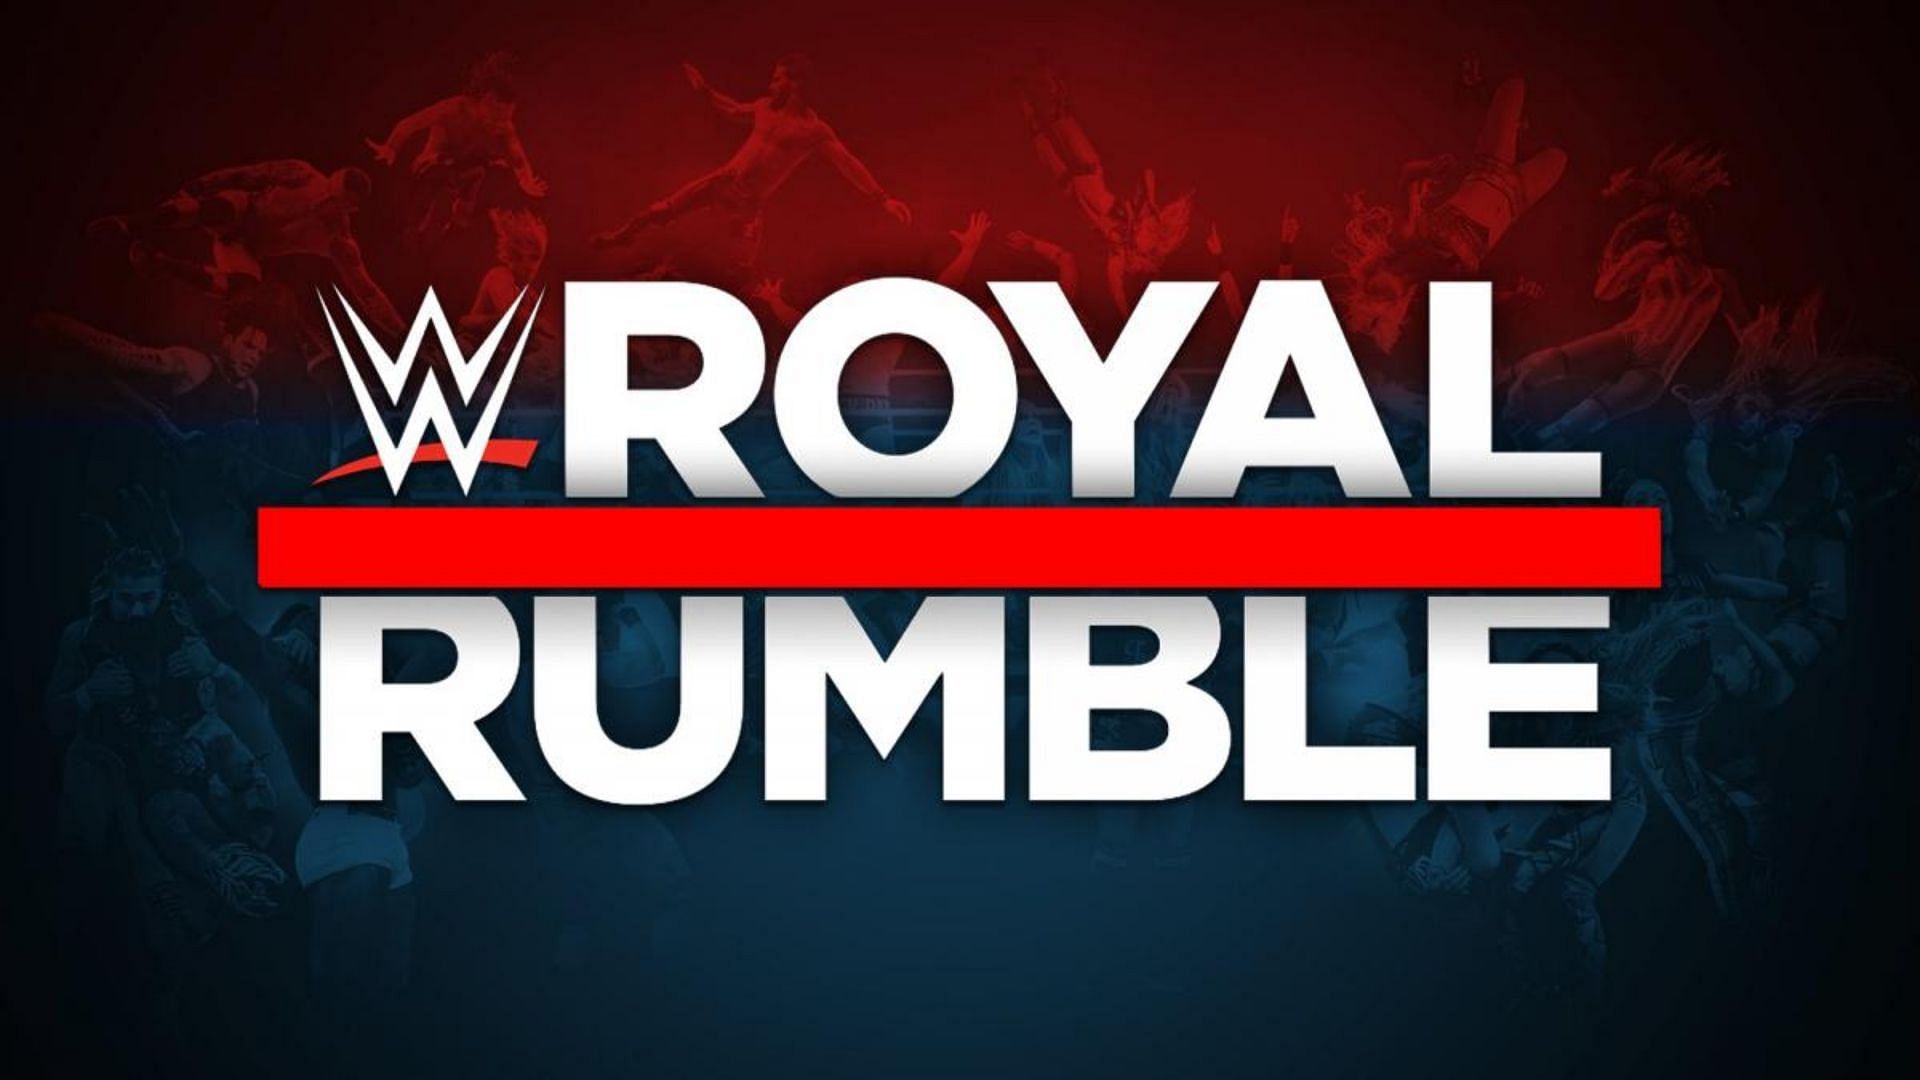 The annual Royal Rumble is one of the most anticipated events of the year!